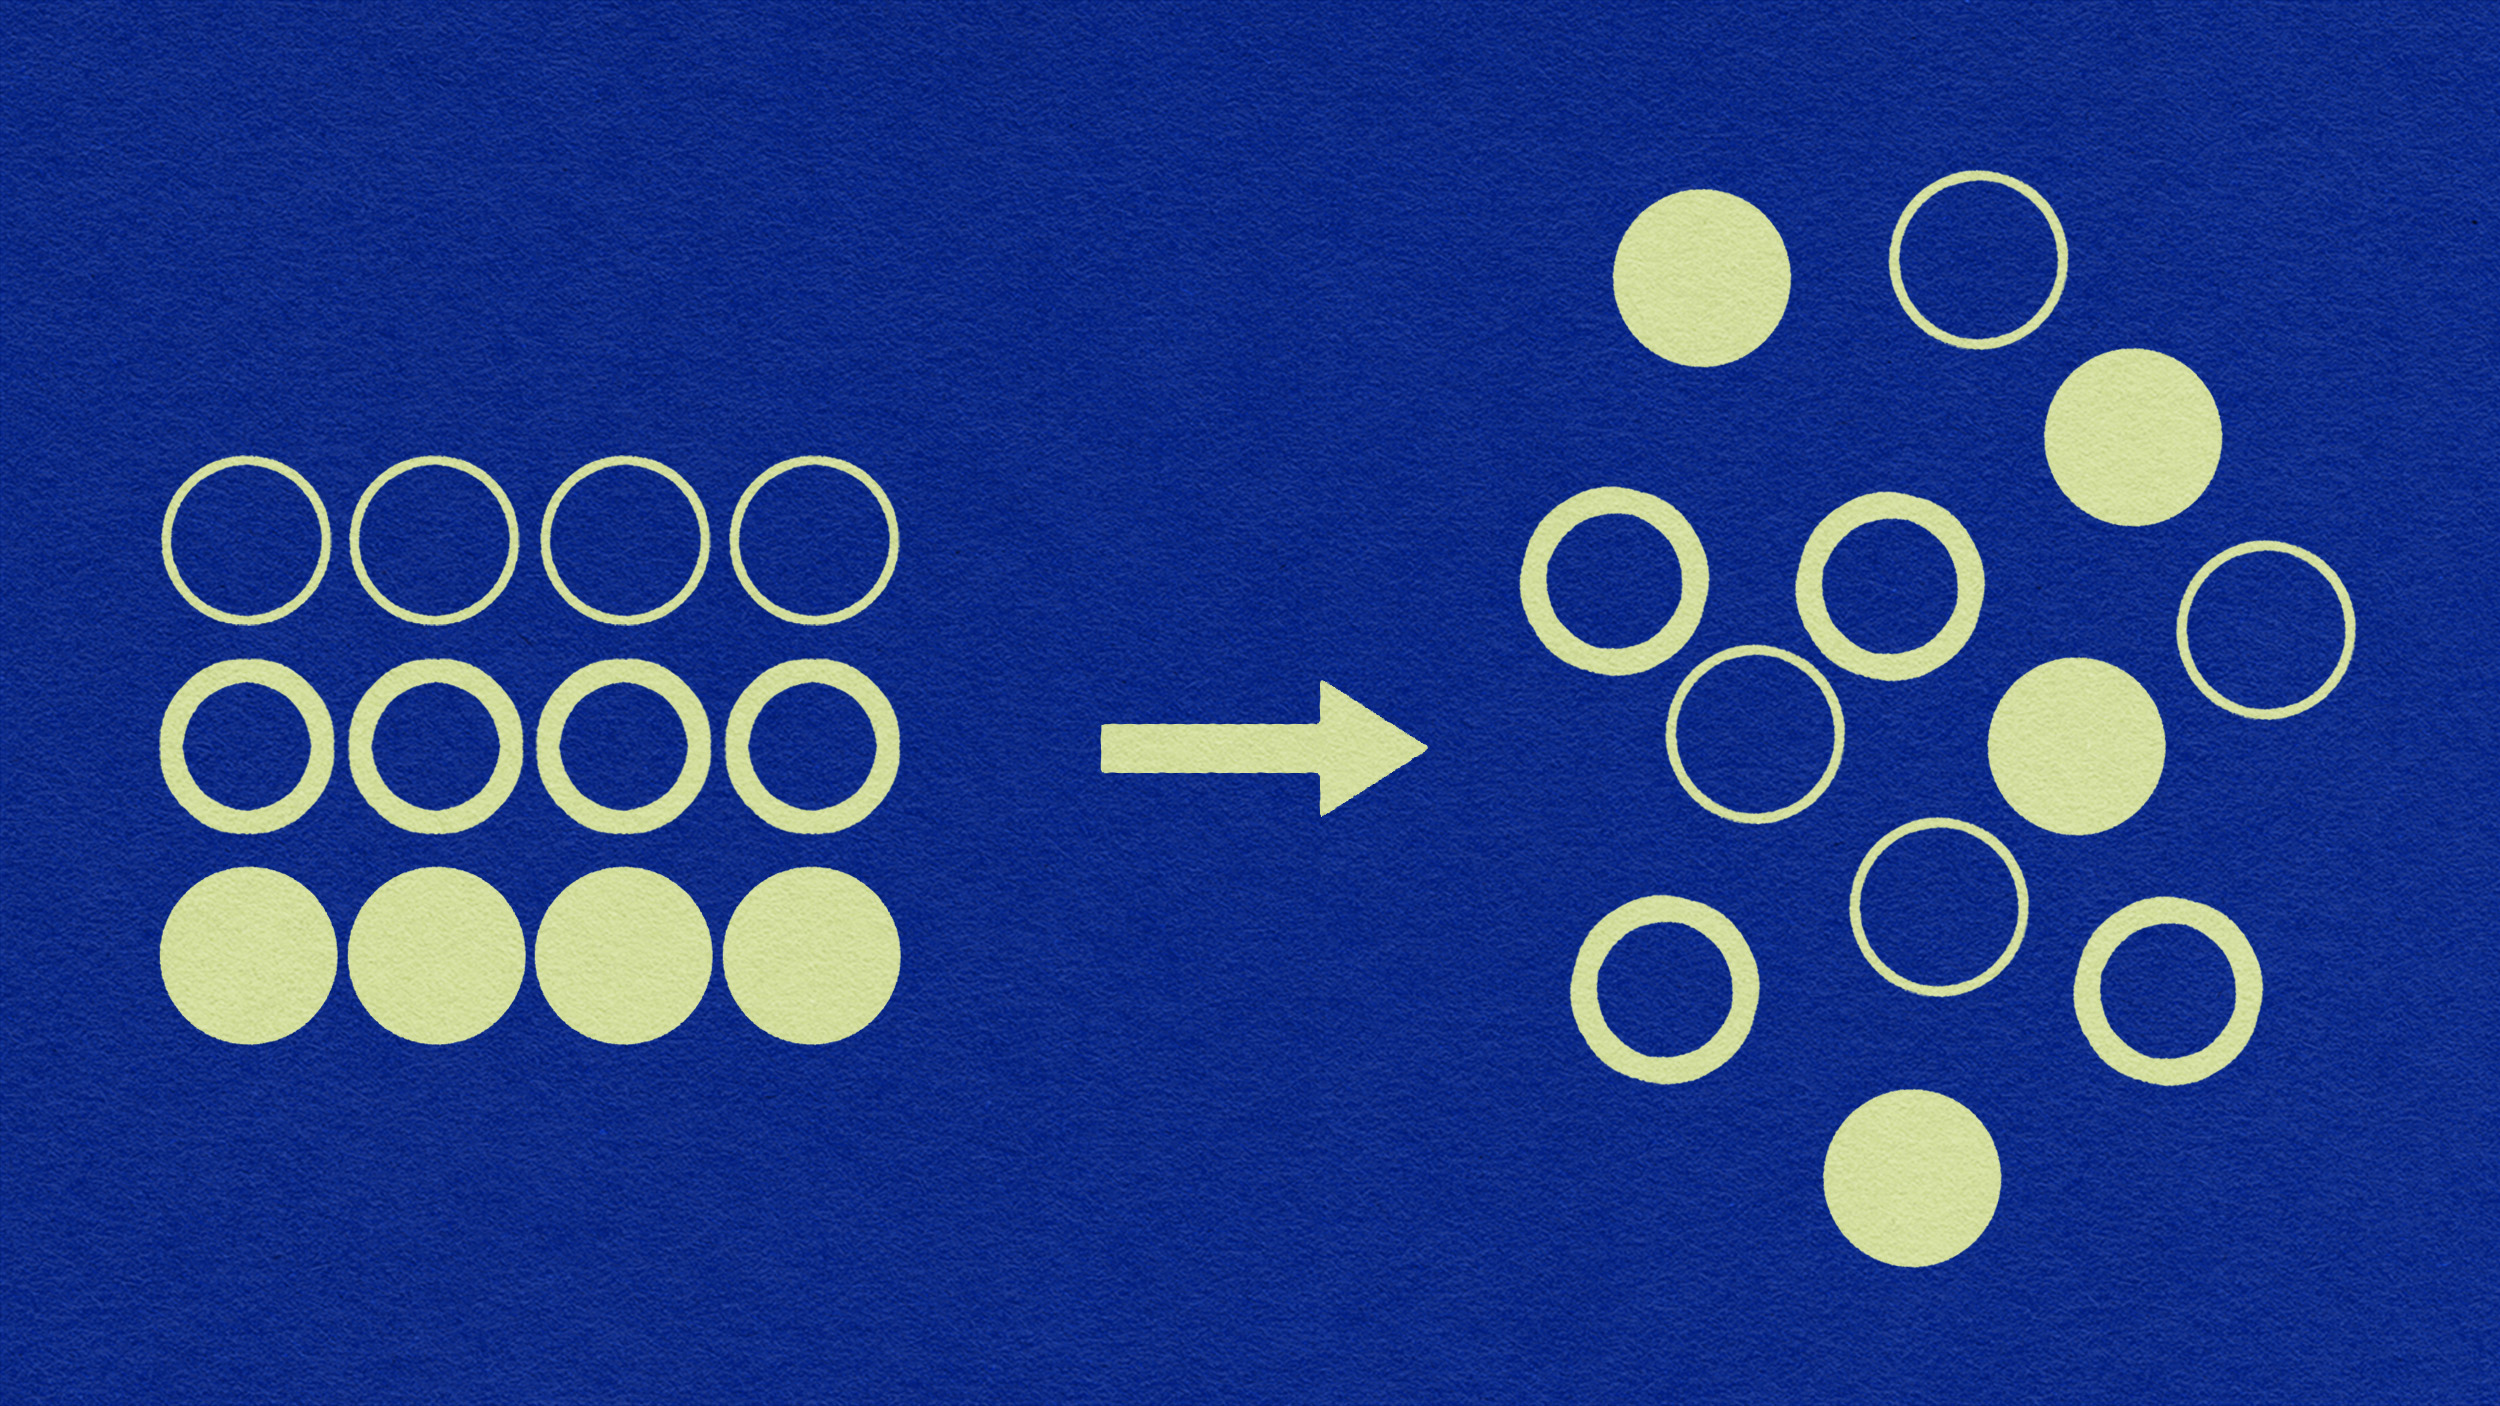 A blue t-shirt with a yellow circle and arrow, representing the universe.